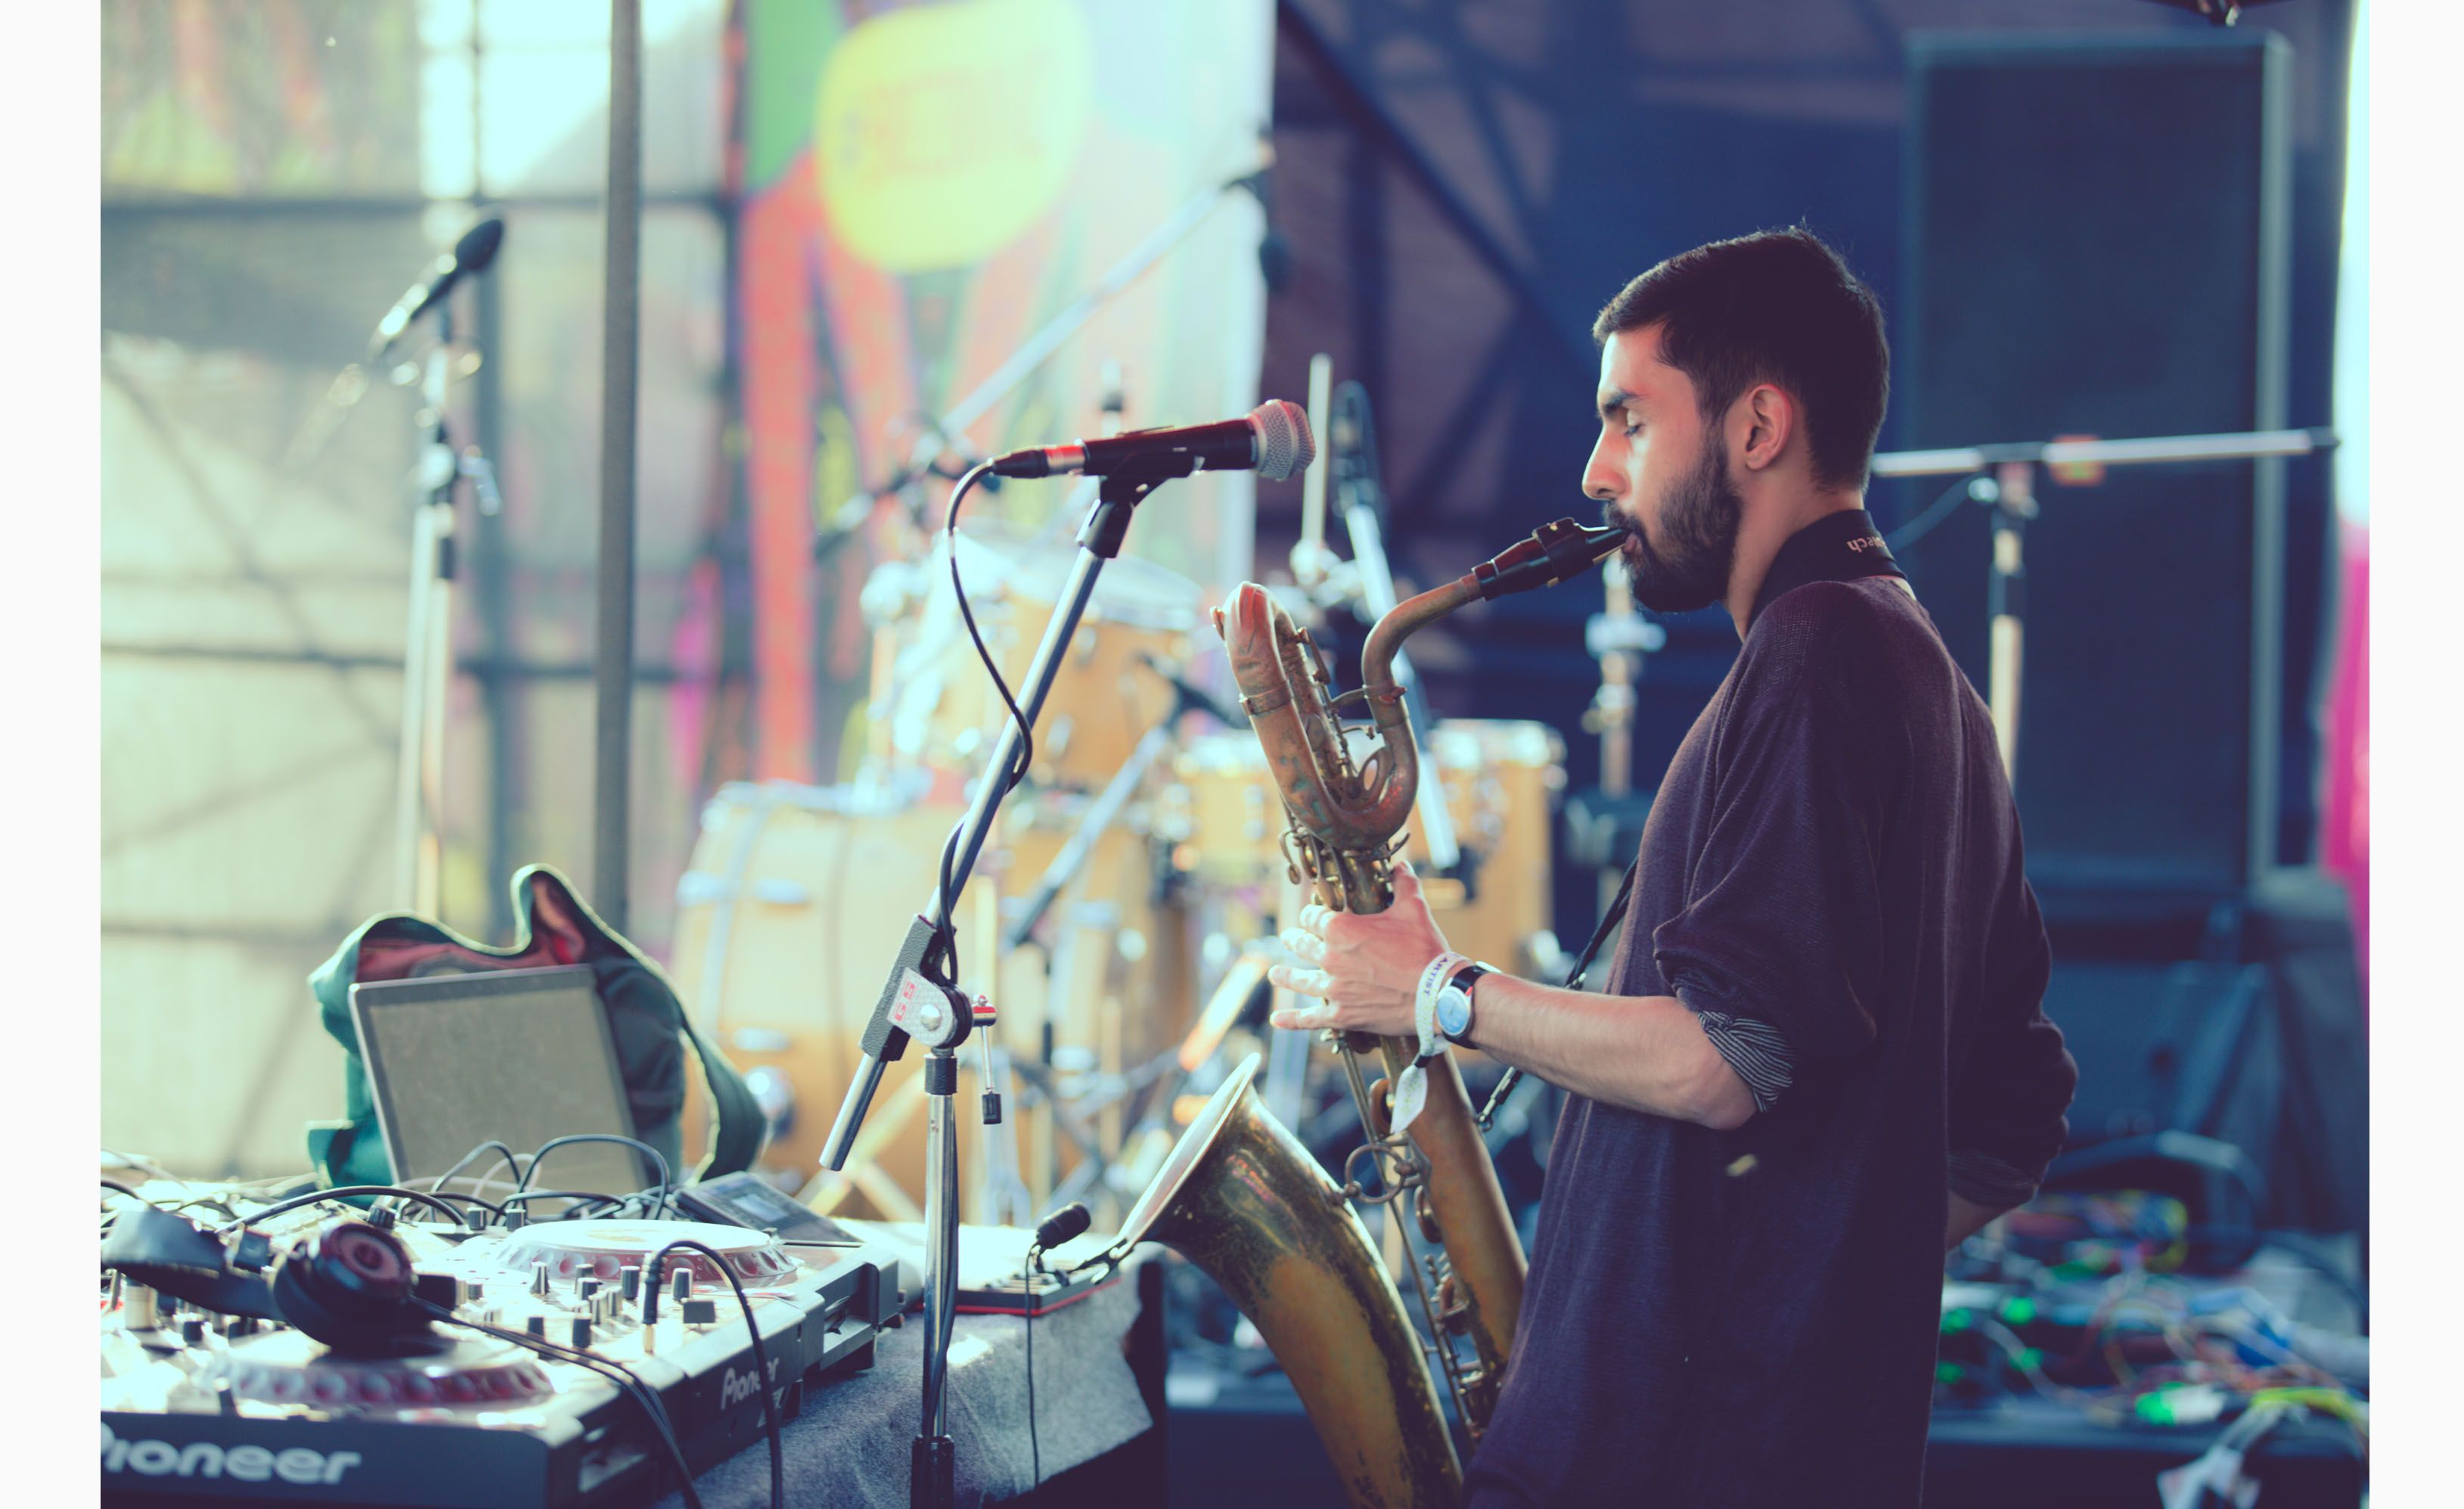 Sid Vashi performing on Day One of the Pune edition of BACARDI NH7 Weekender. Photo Credit - Himanshu Rohilla